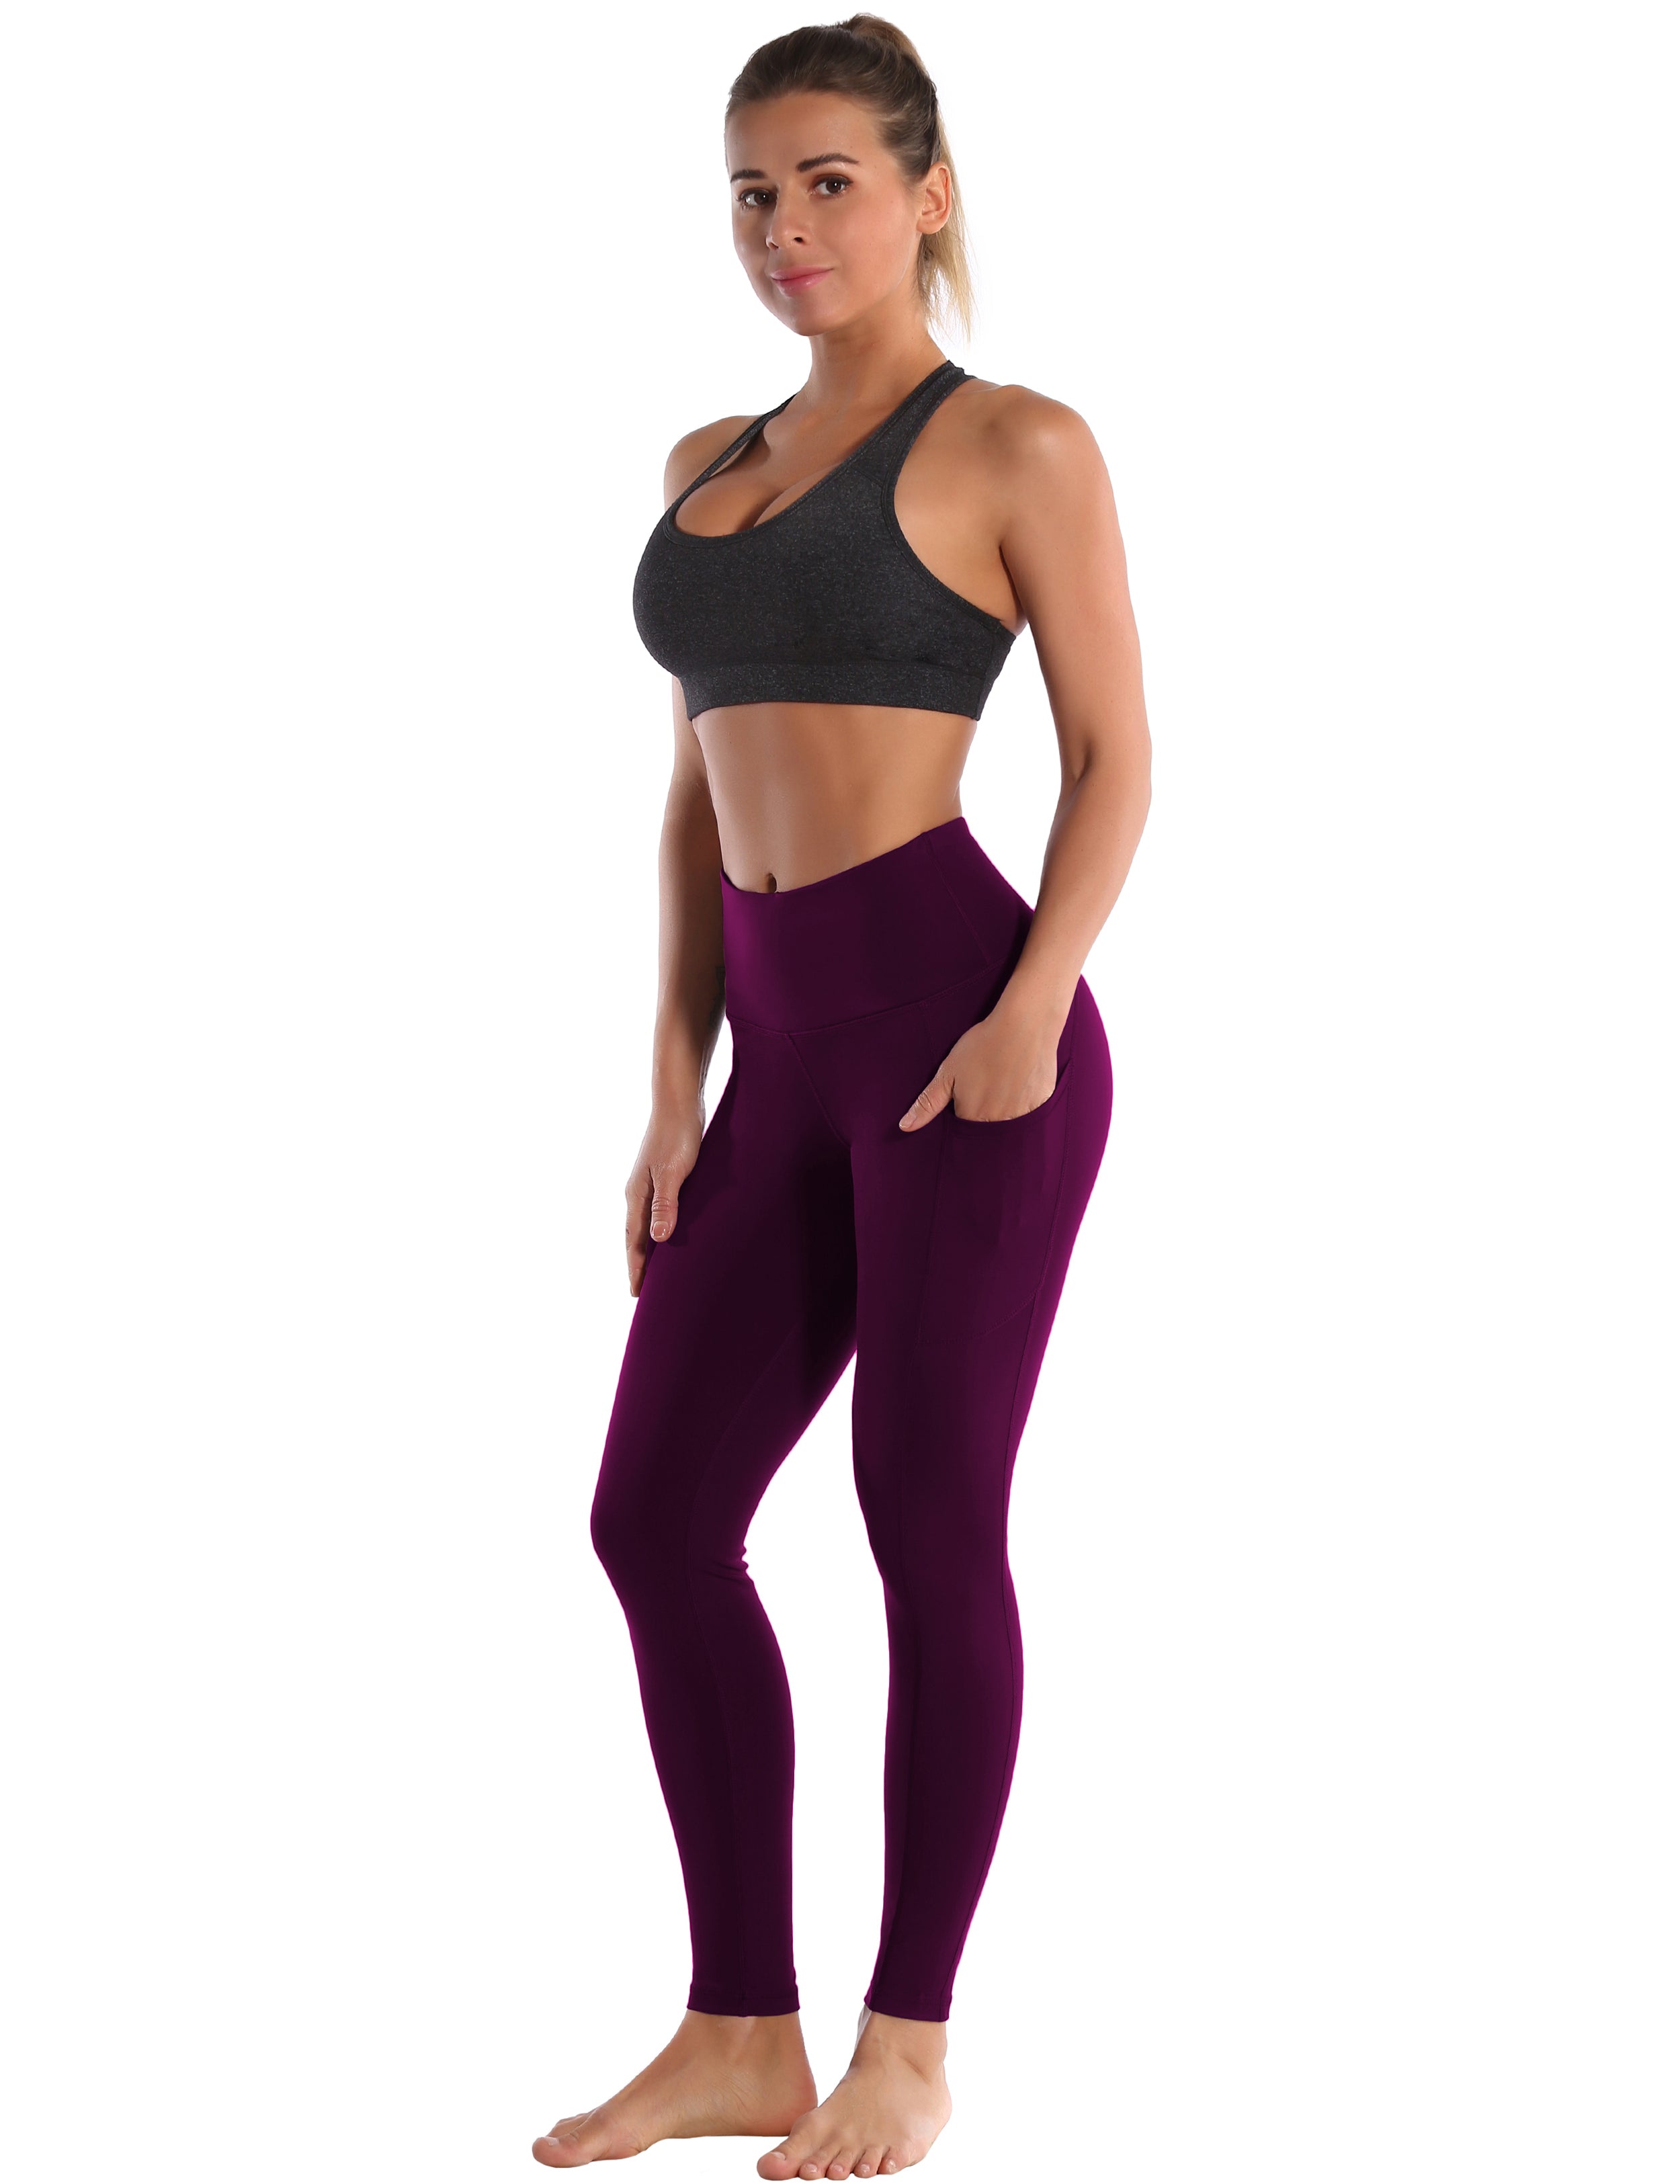 Hip Line Side Pockets Yoga Pants plum Sexy Hip Line Side Pockets 75%Nylon/25%Spandex Fabric doesn't attract lint easily 4-way stretch No see-through Moisture-wicking Tummy control Inner pocket Two lengths